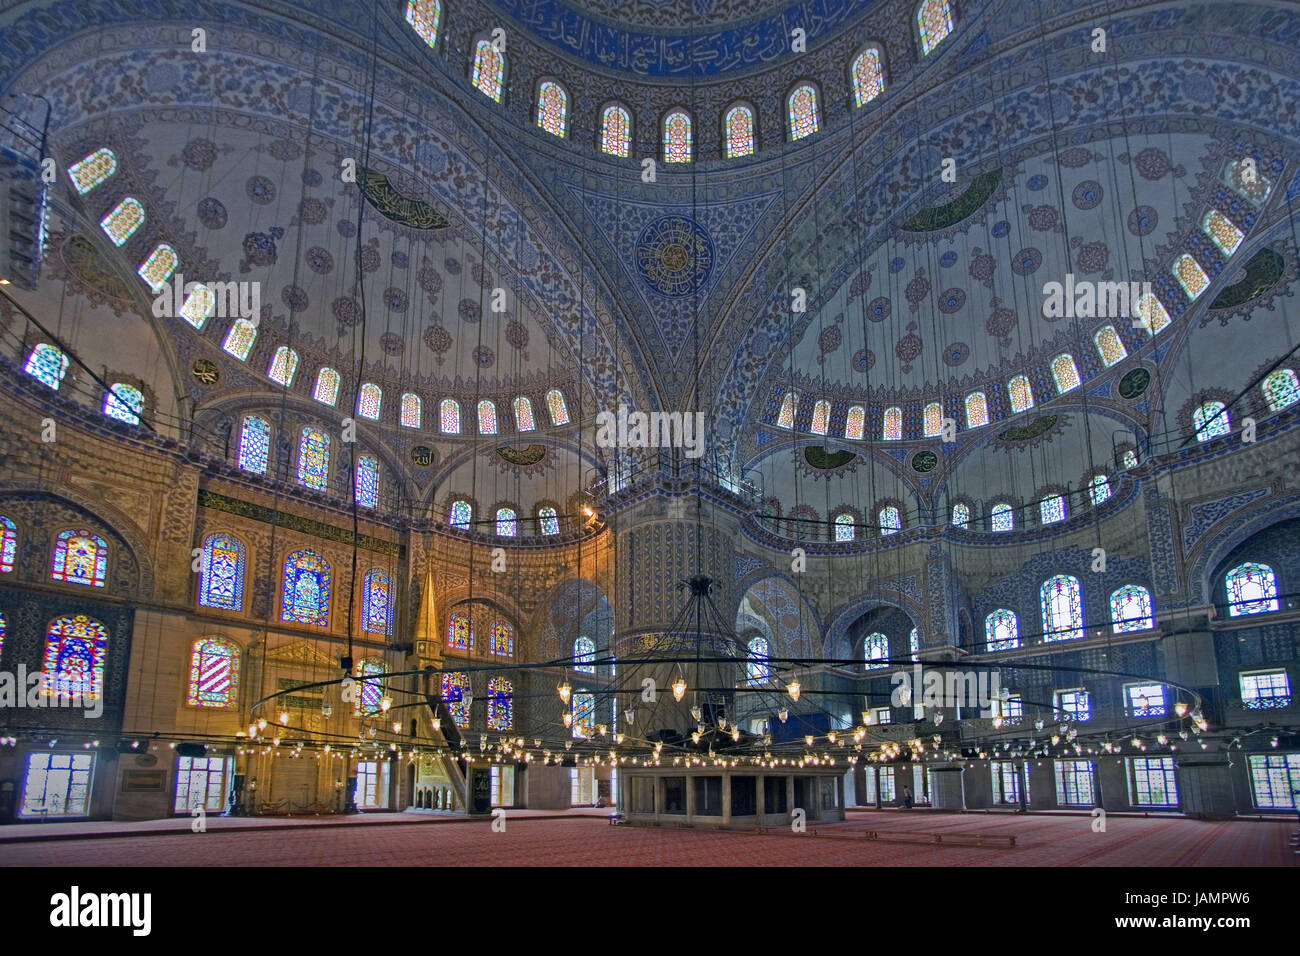 Turkey,Istanbul,sultan Ahmet Camii,'blue mosque',dome,interior shot,town,city,metropolis,port,culture,faith,religion,Islam,structure,historically,architecture,church,sacred construction,Sultan-Ahmet-Camii,sultan's Ahmed's mosque,mosque,domed building,landmark,place of interest,inside,deserted,curves,grace note,ornaments,tiles,lights,lamps, Stock Photo